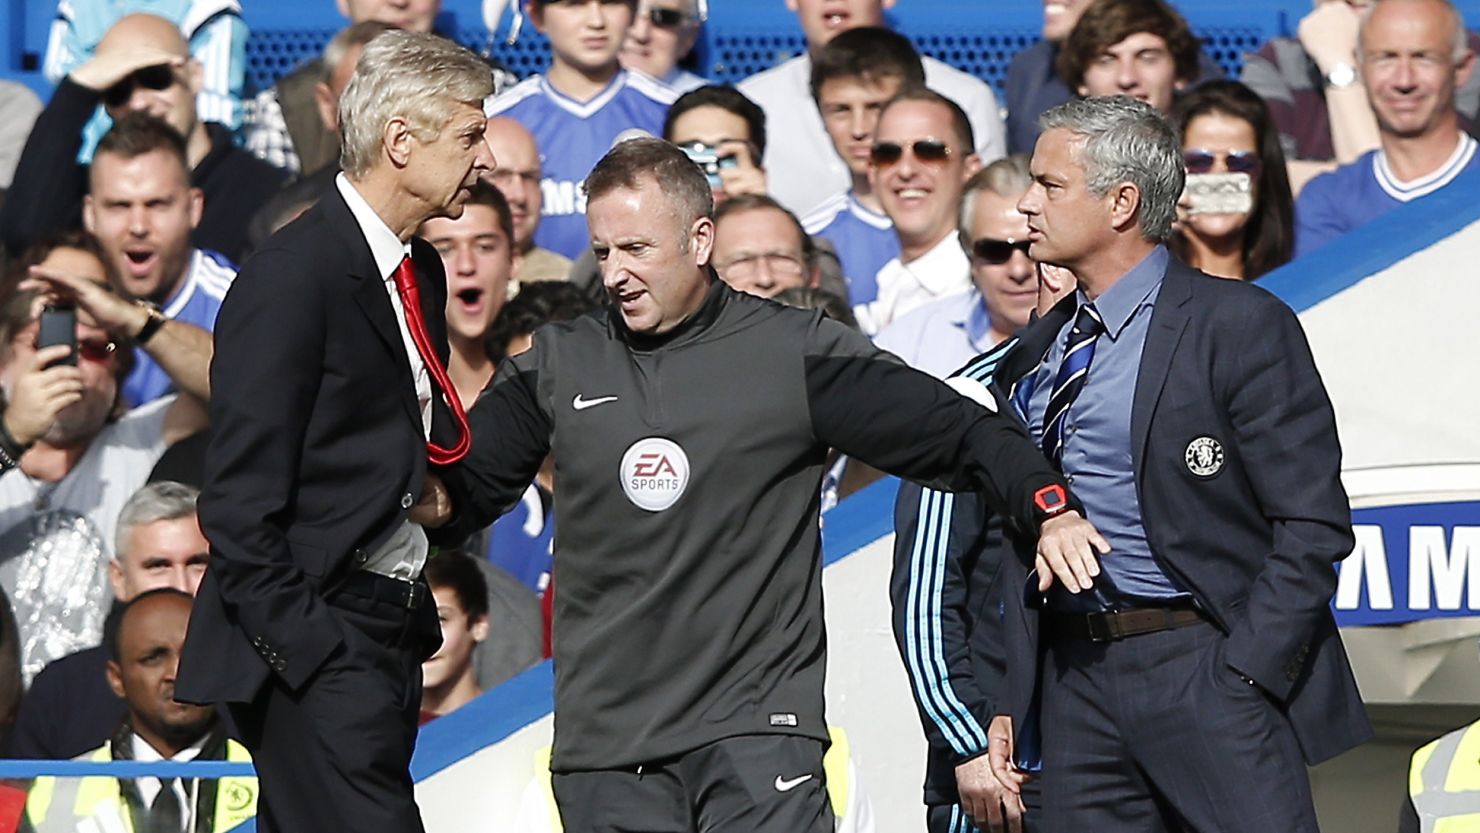 Arsene Wenger and Jose Mourinho have to be separated by fourth official Jonathon Moss in the EPL clash at Stamford Bridge.